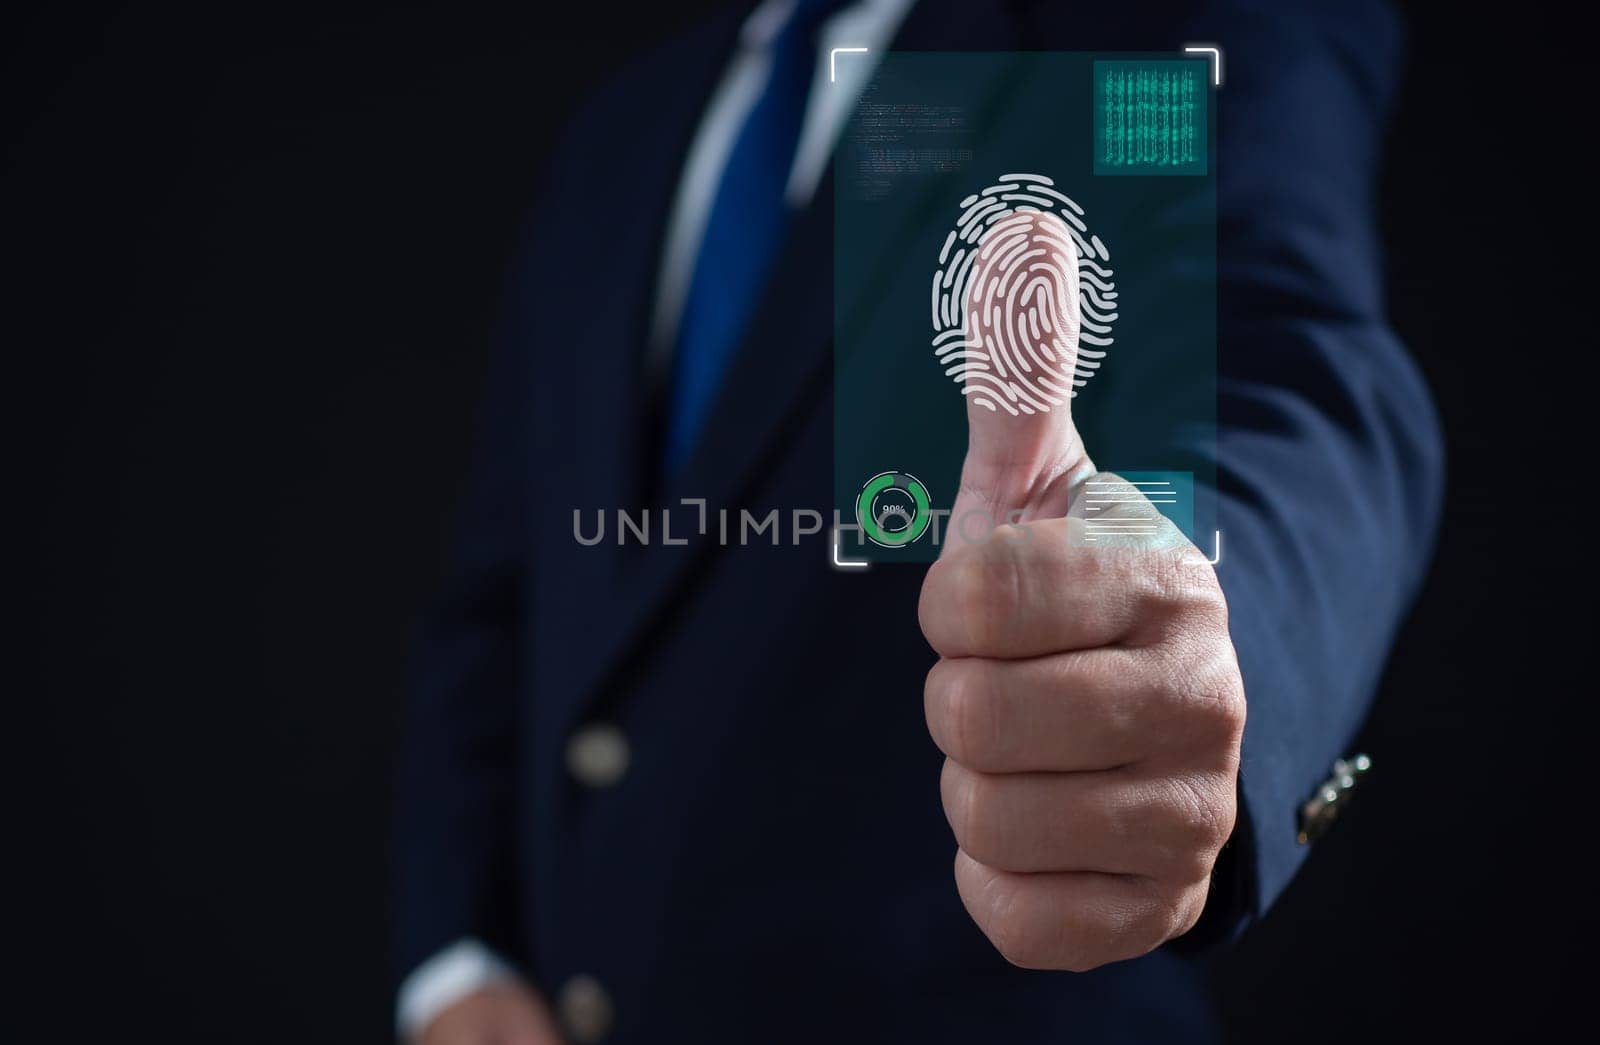 Businessman scan fingerprint biometric identity and approval. Secure access granted by valid fingerprint scan, Business Technology Safety Internet Network Concept, Business Technology Safety Internet Network Concept.